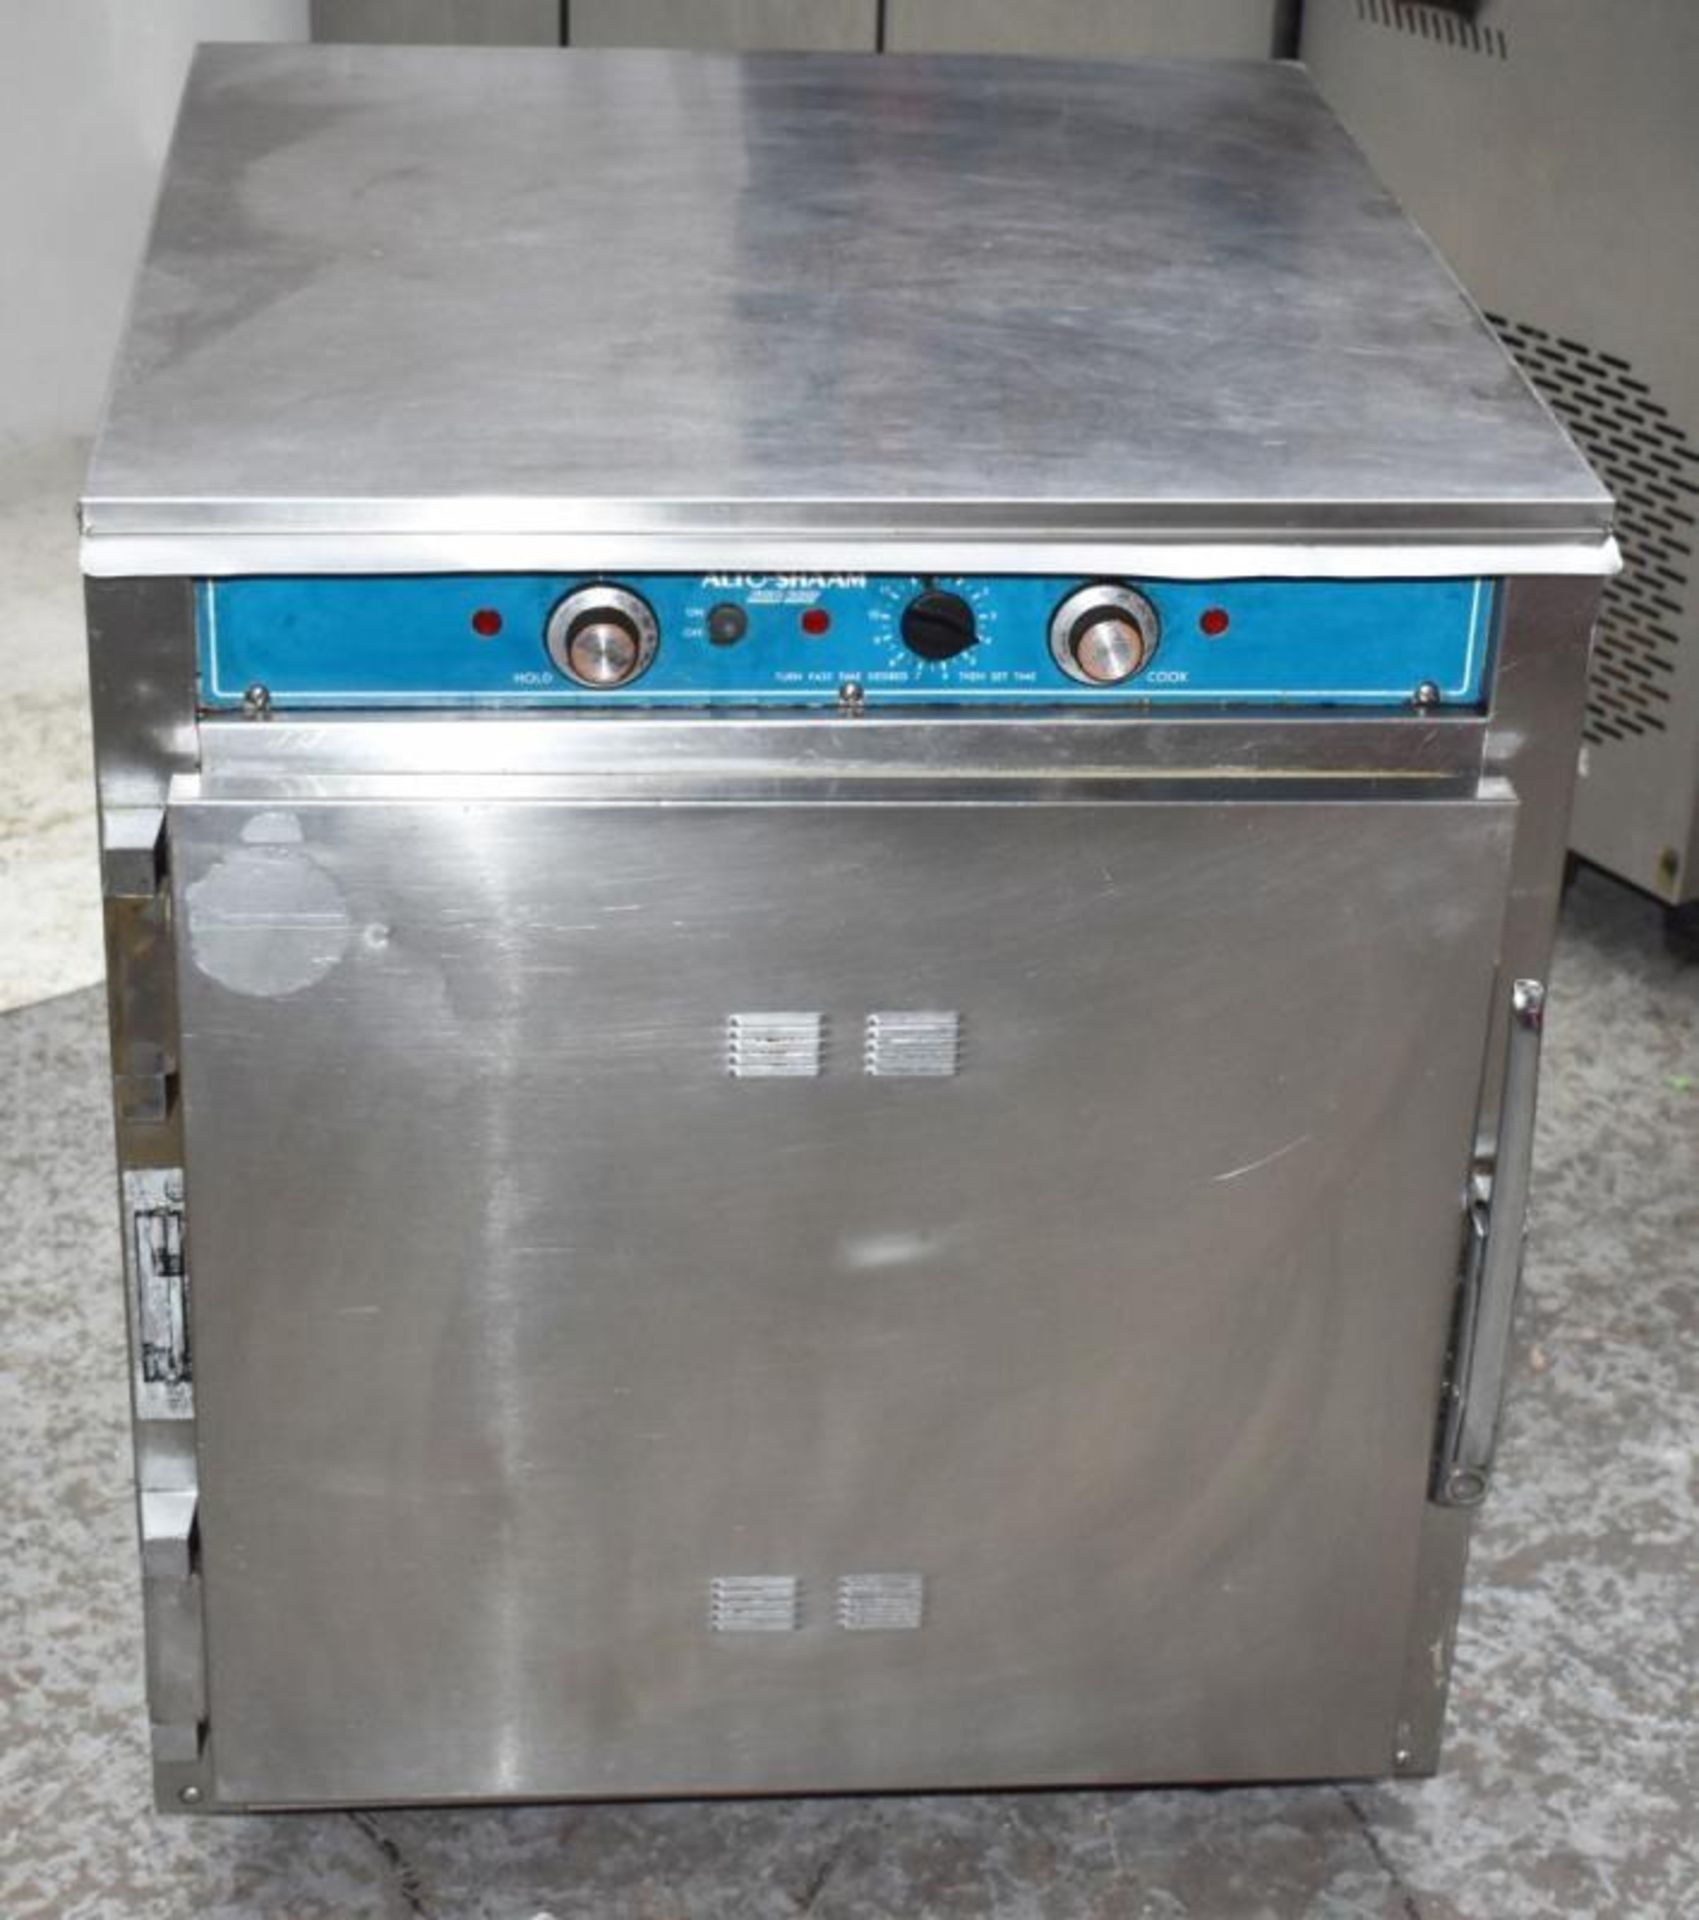 1 x Auto-Shaan Halo Heat Cook and Hold Food Cabinet - 240v - H76 x W65 x D75 cms - CL459 - Ref248 - - Image 4 of 7